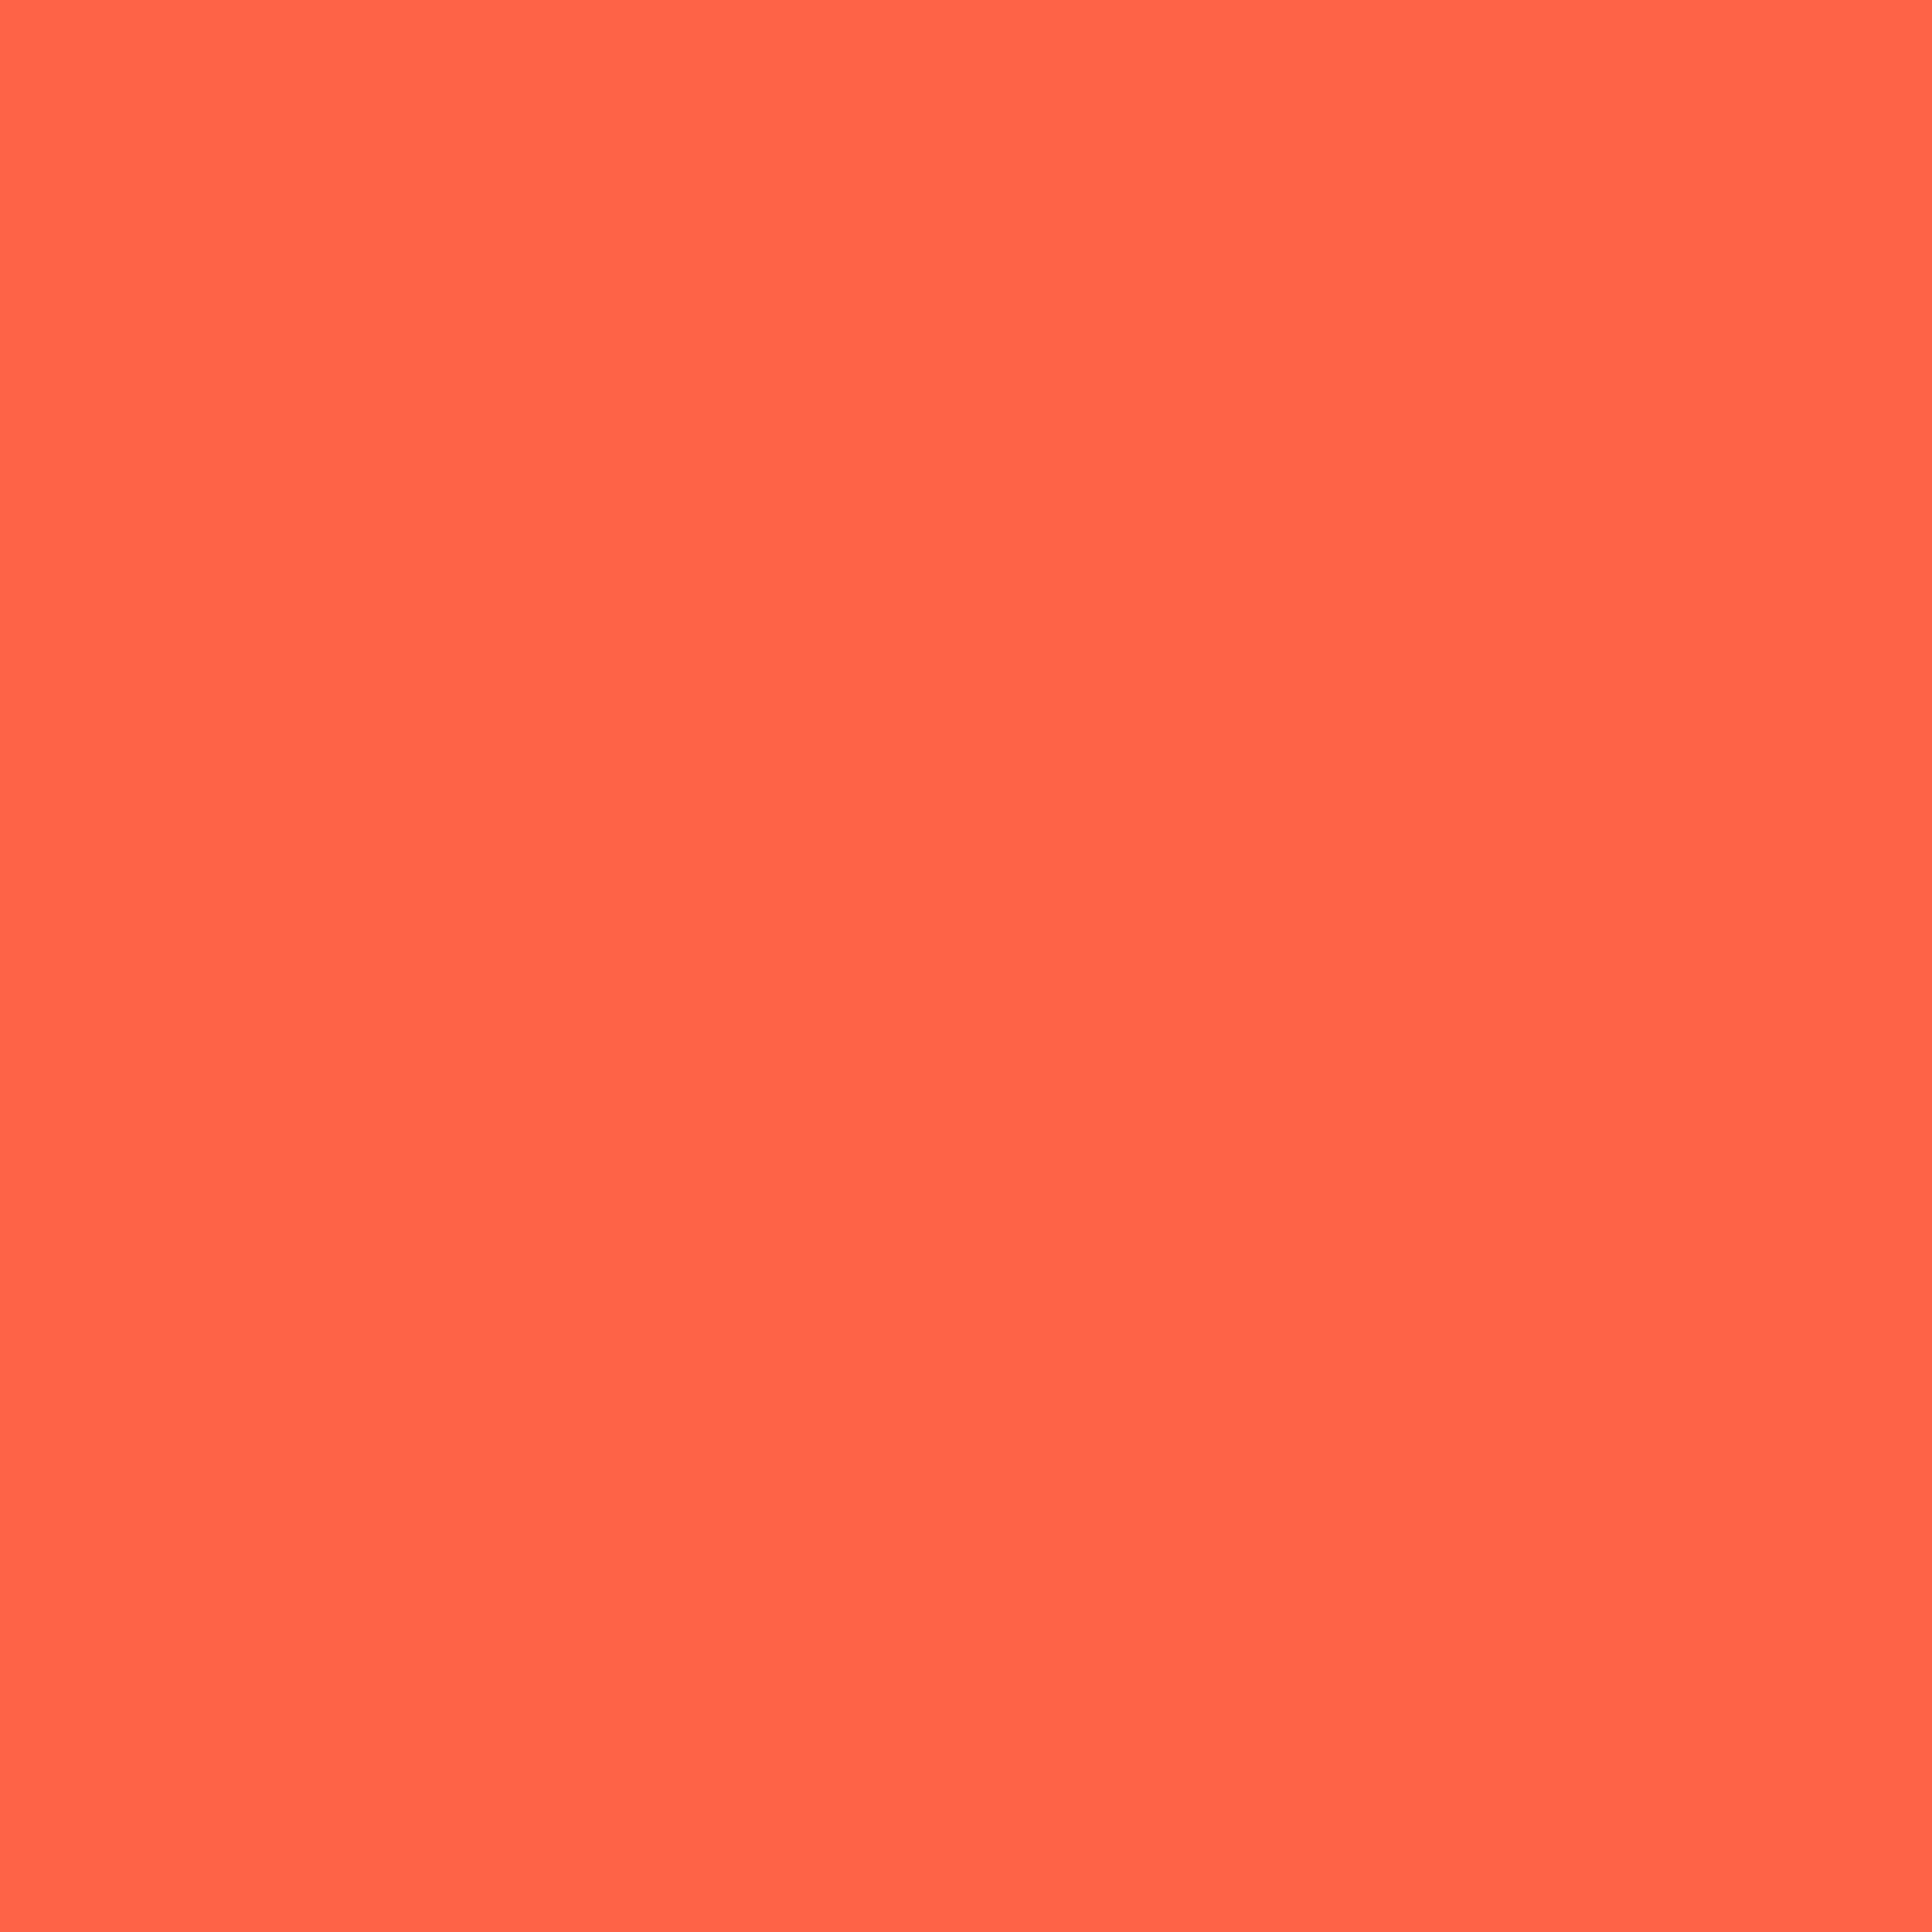 3600x3600 Tomato Solid Color Background